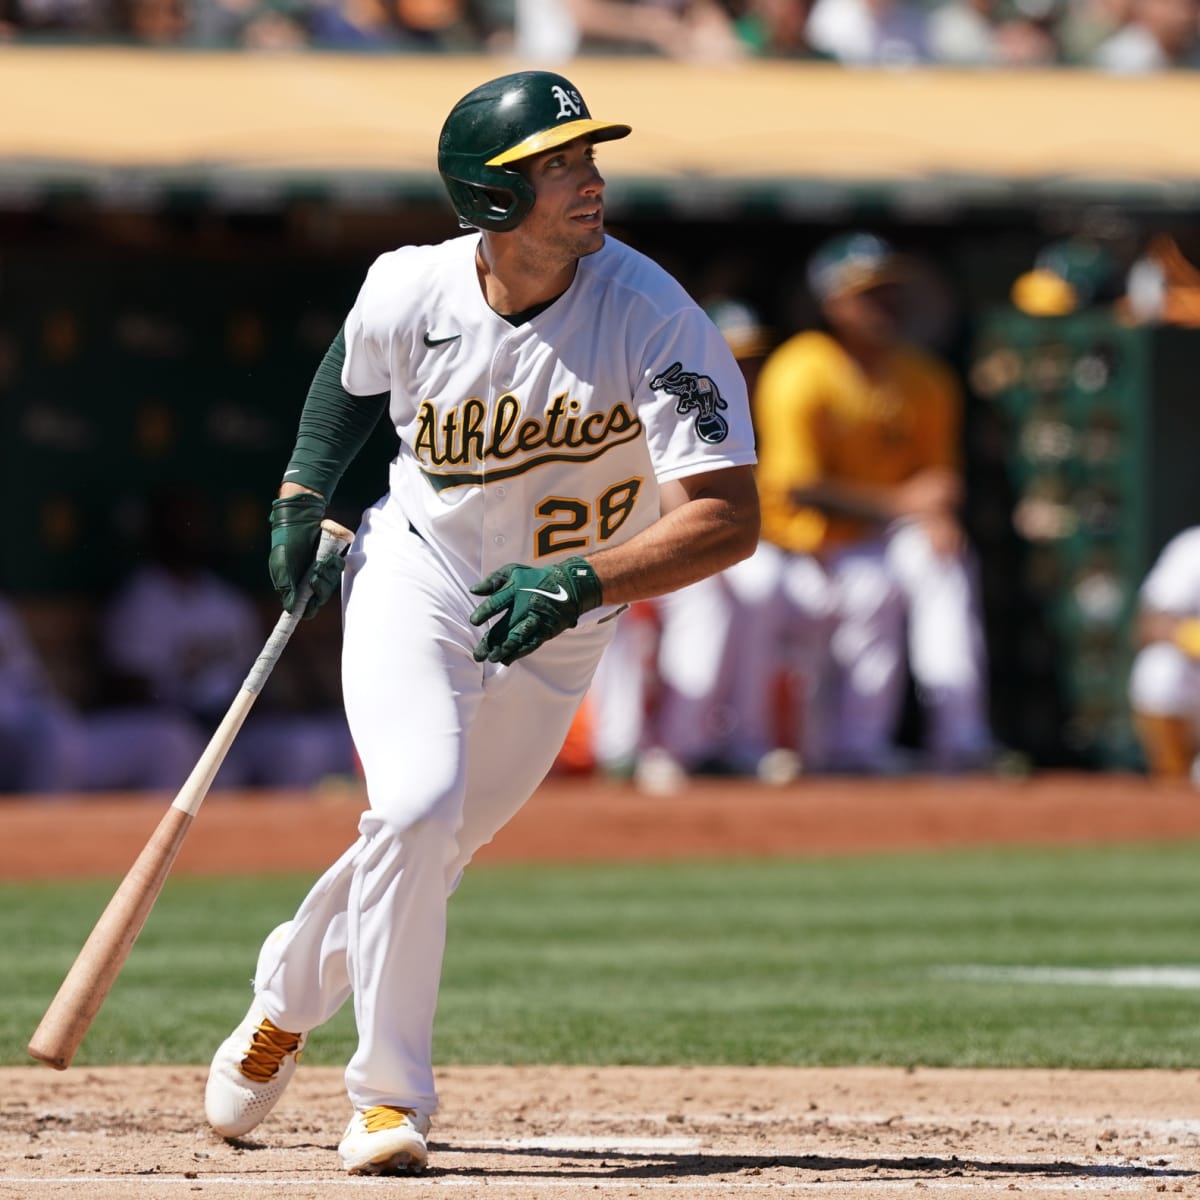 Braves have reportedly checked in on A's first baseman Matt Olson